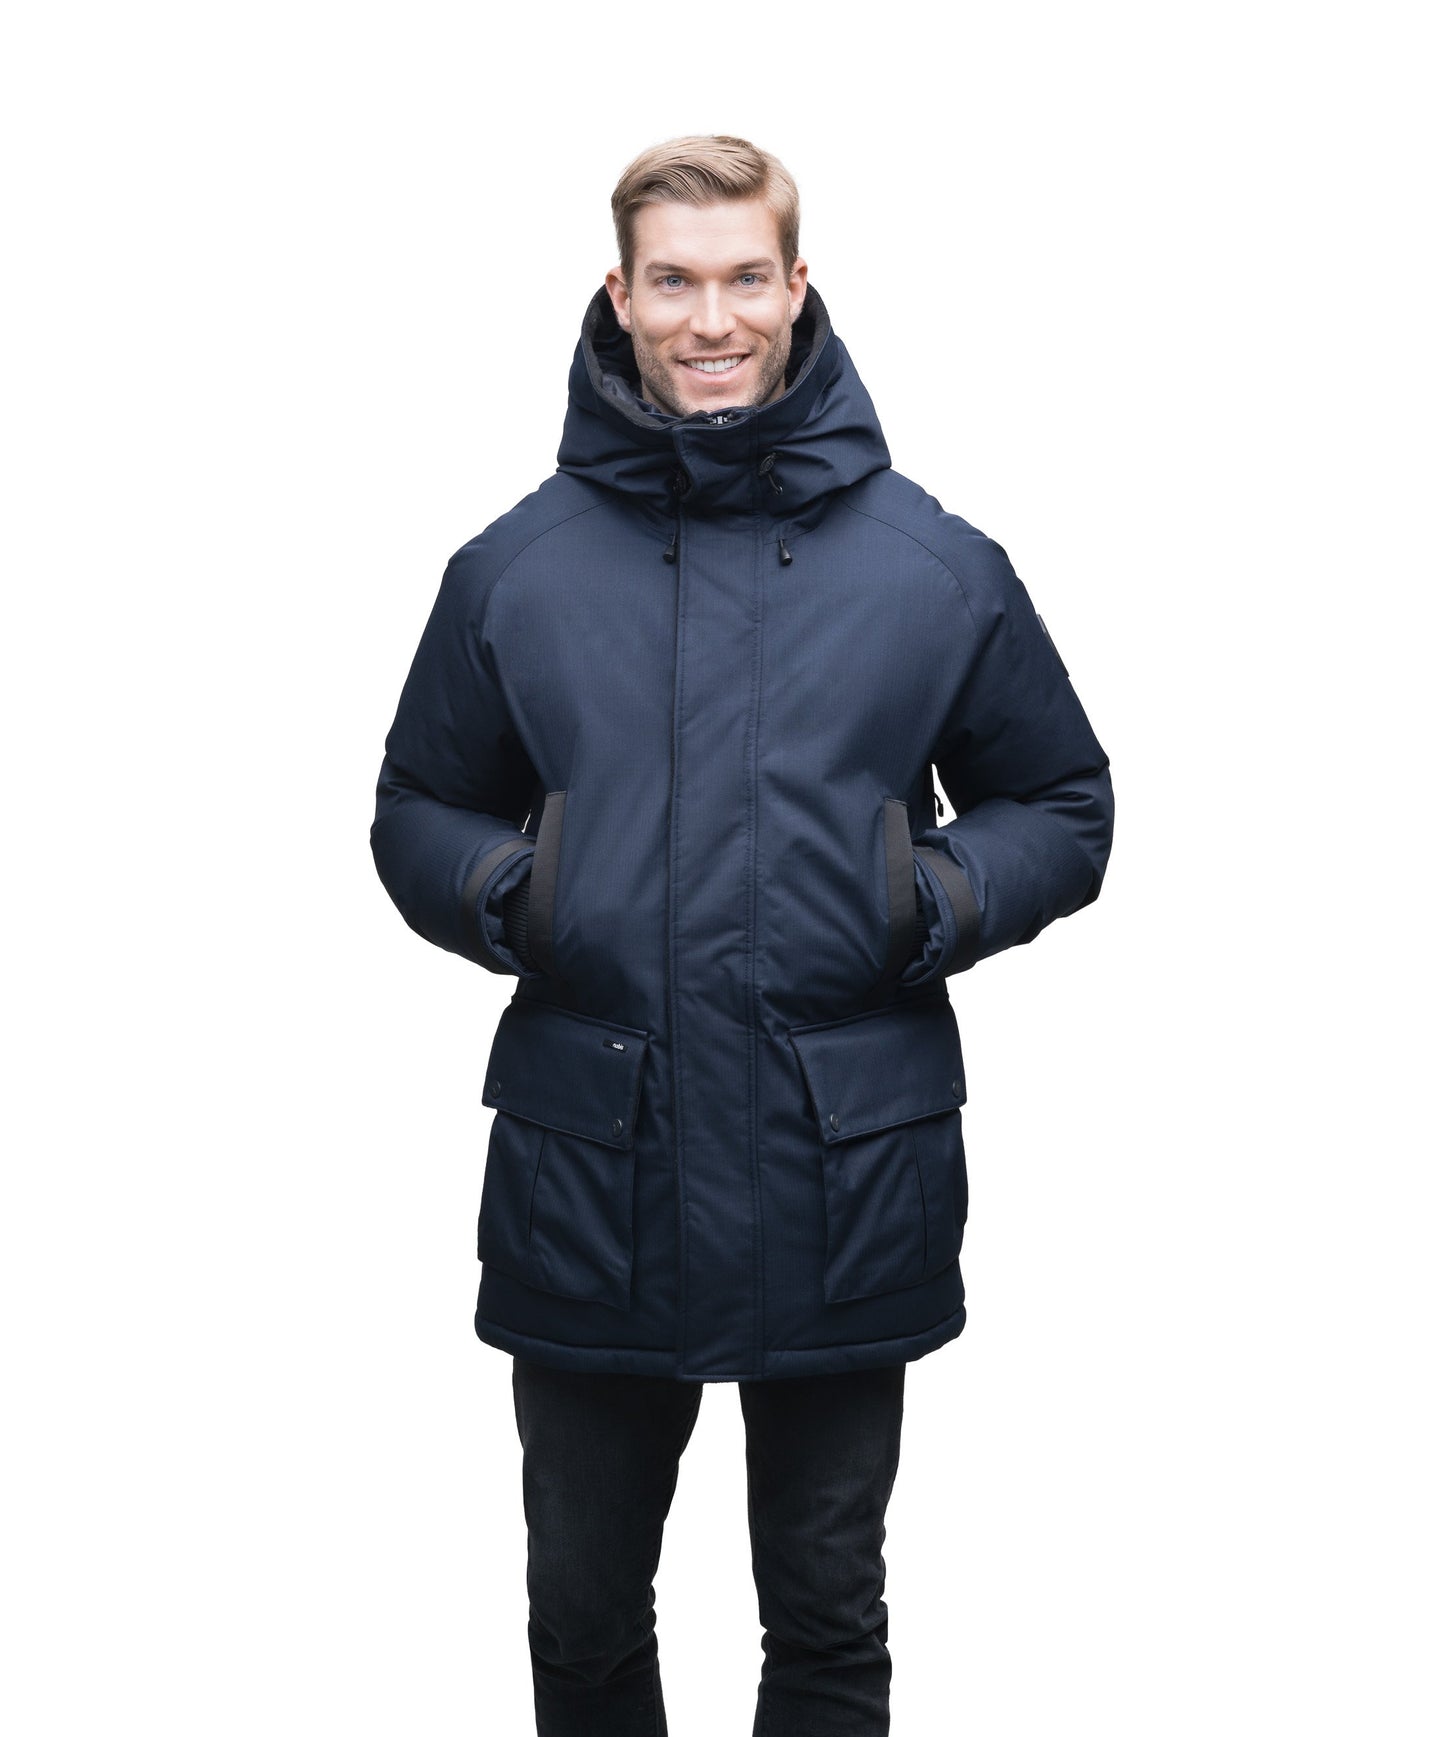 A classic men's bomber jacket with luxurious Rex Rabbit fur ruff trim in CH Navy